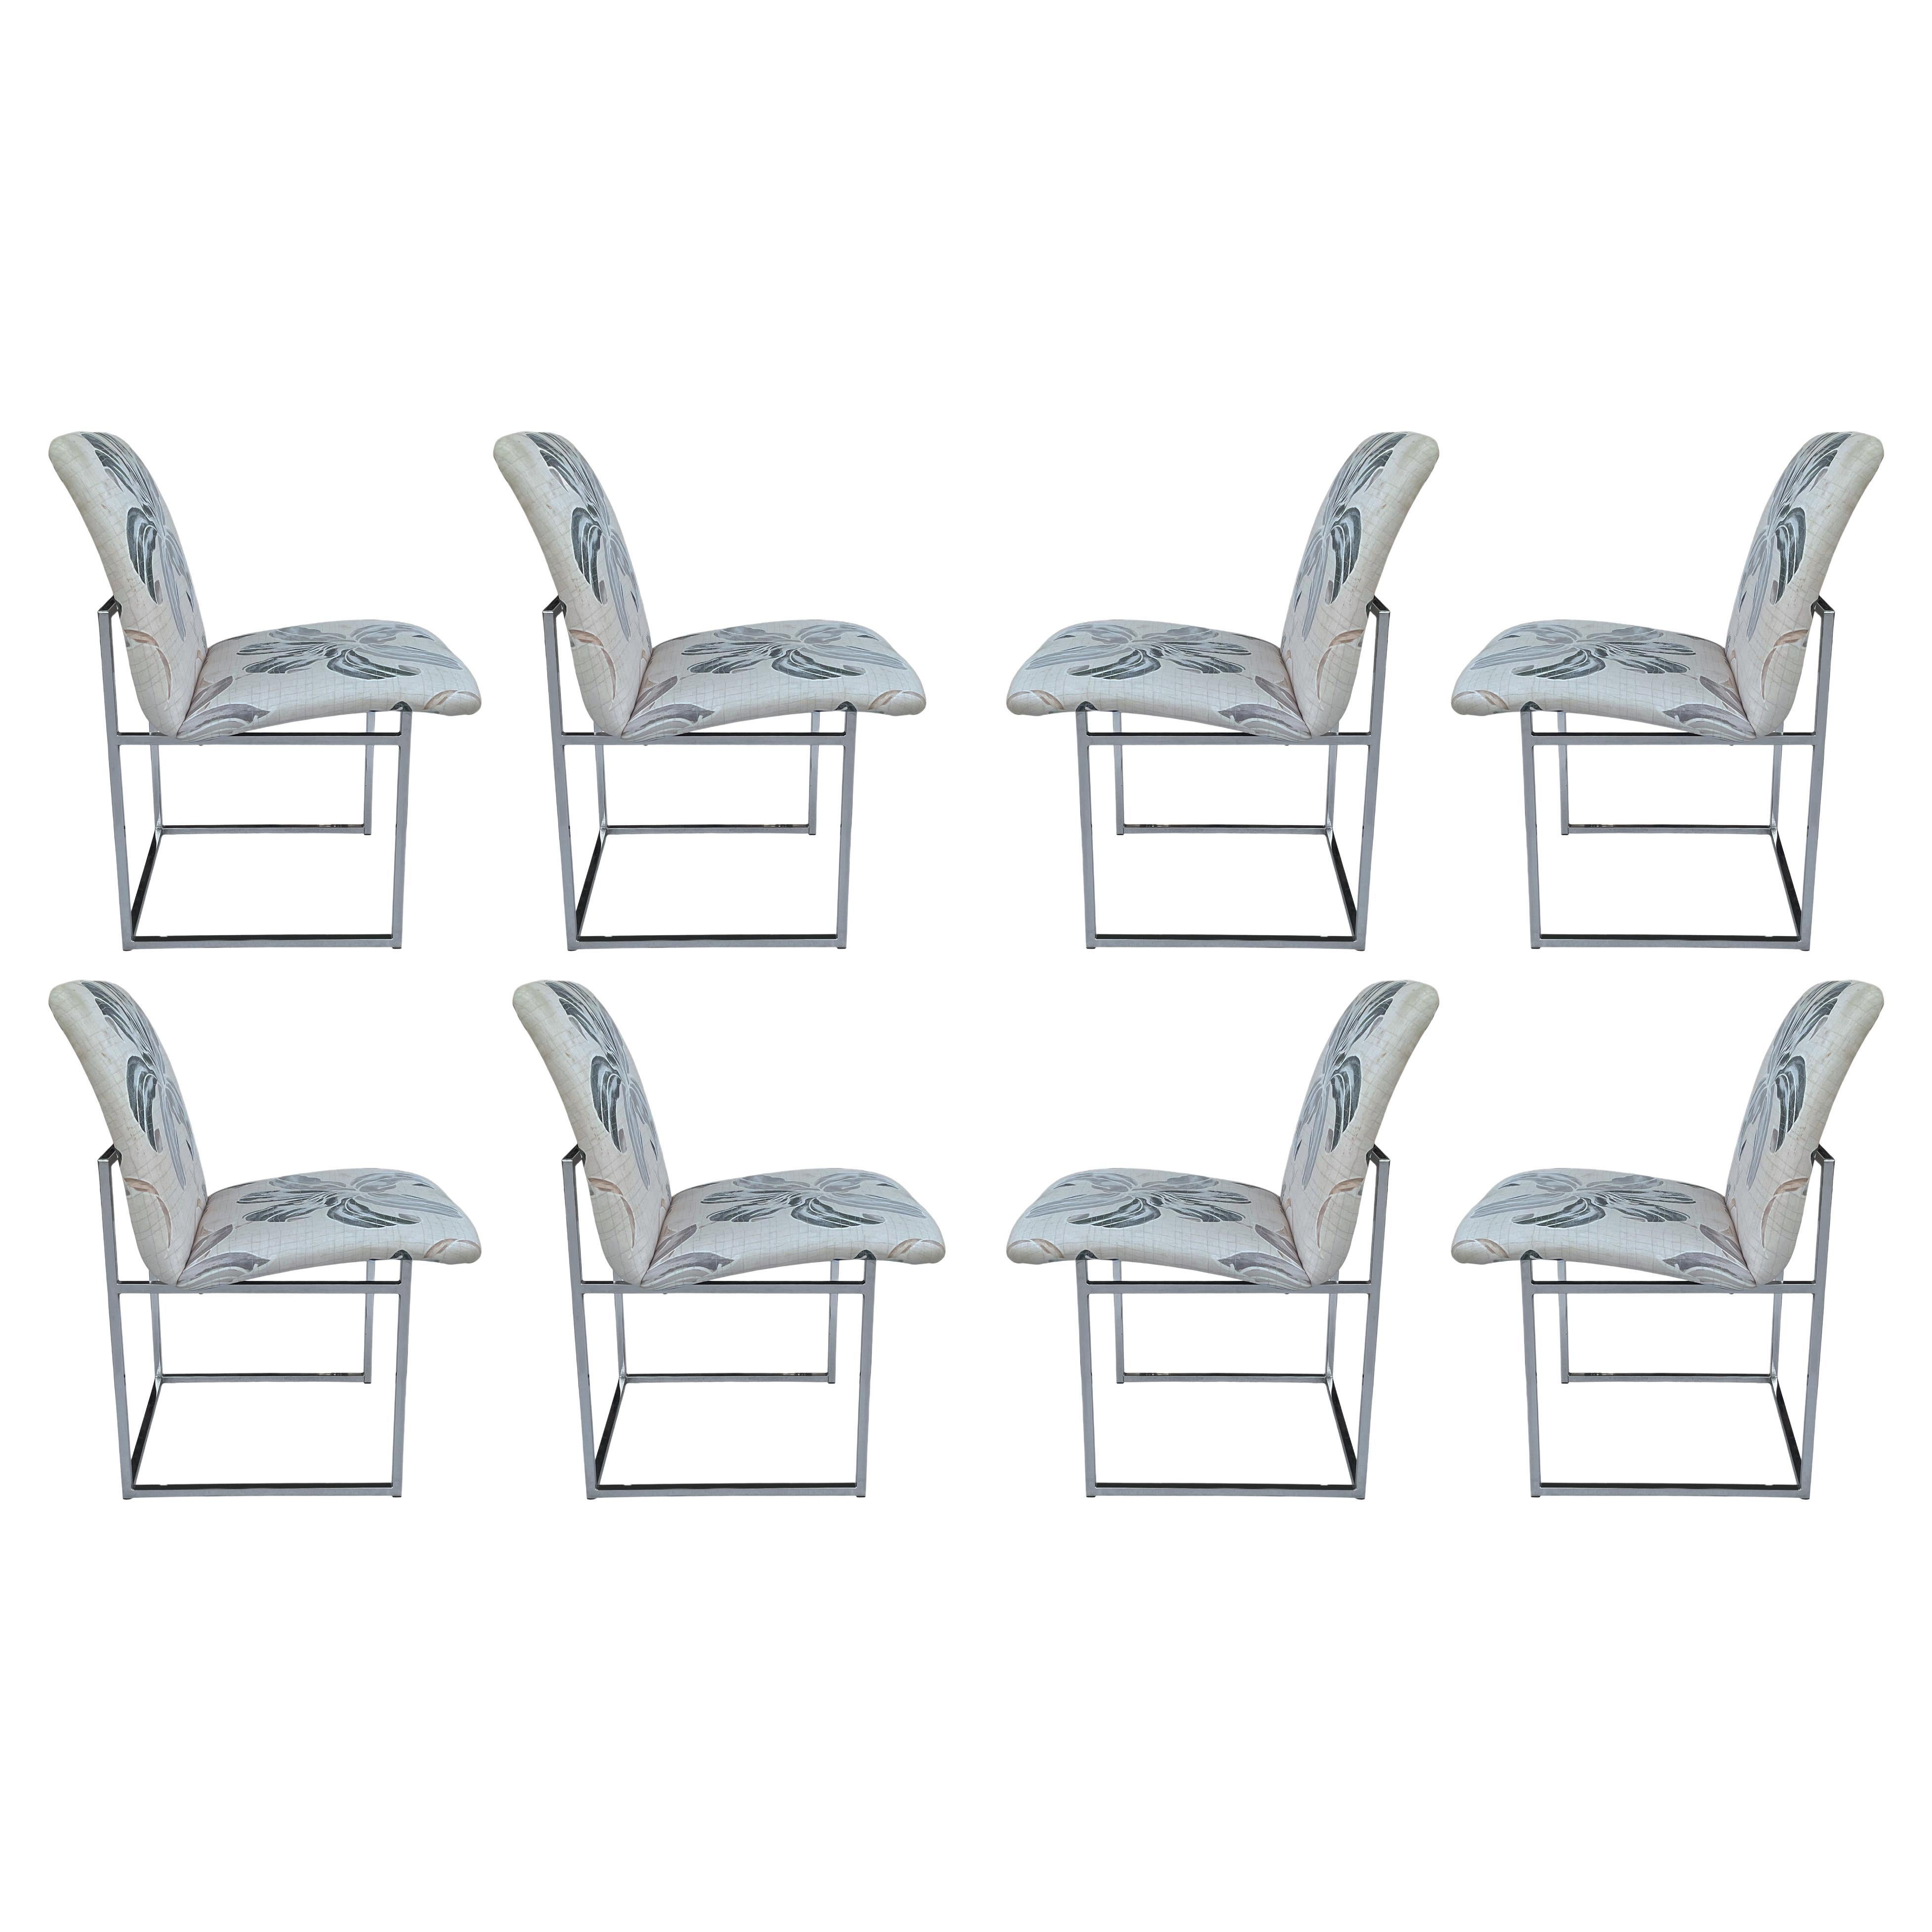 Set of Eight Mid-Century Modern Chrome Dining Chairs by Milo Baughman